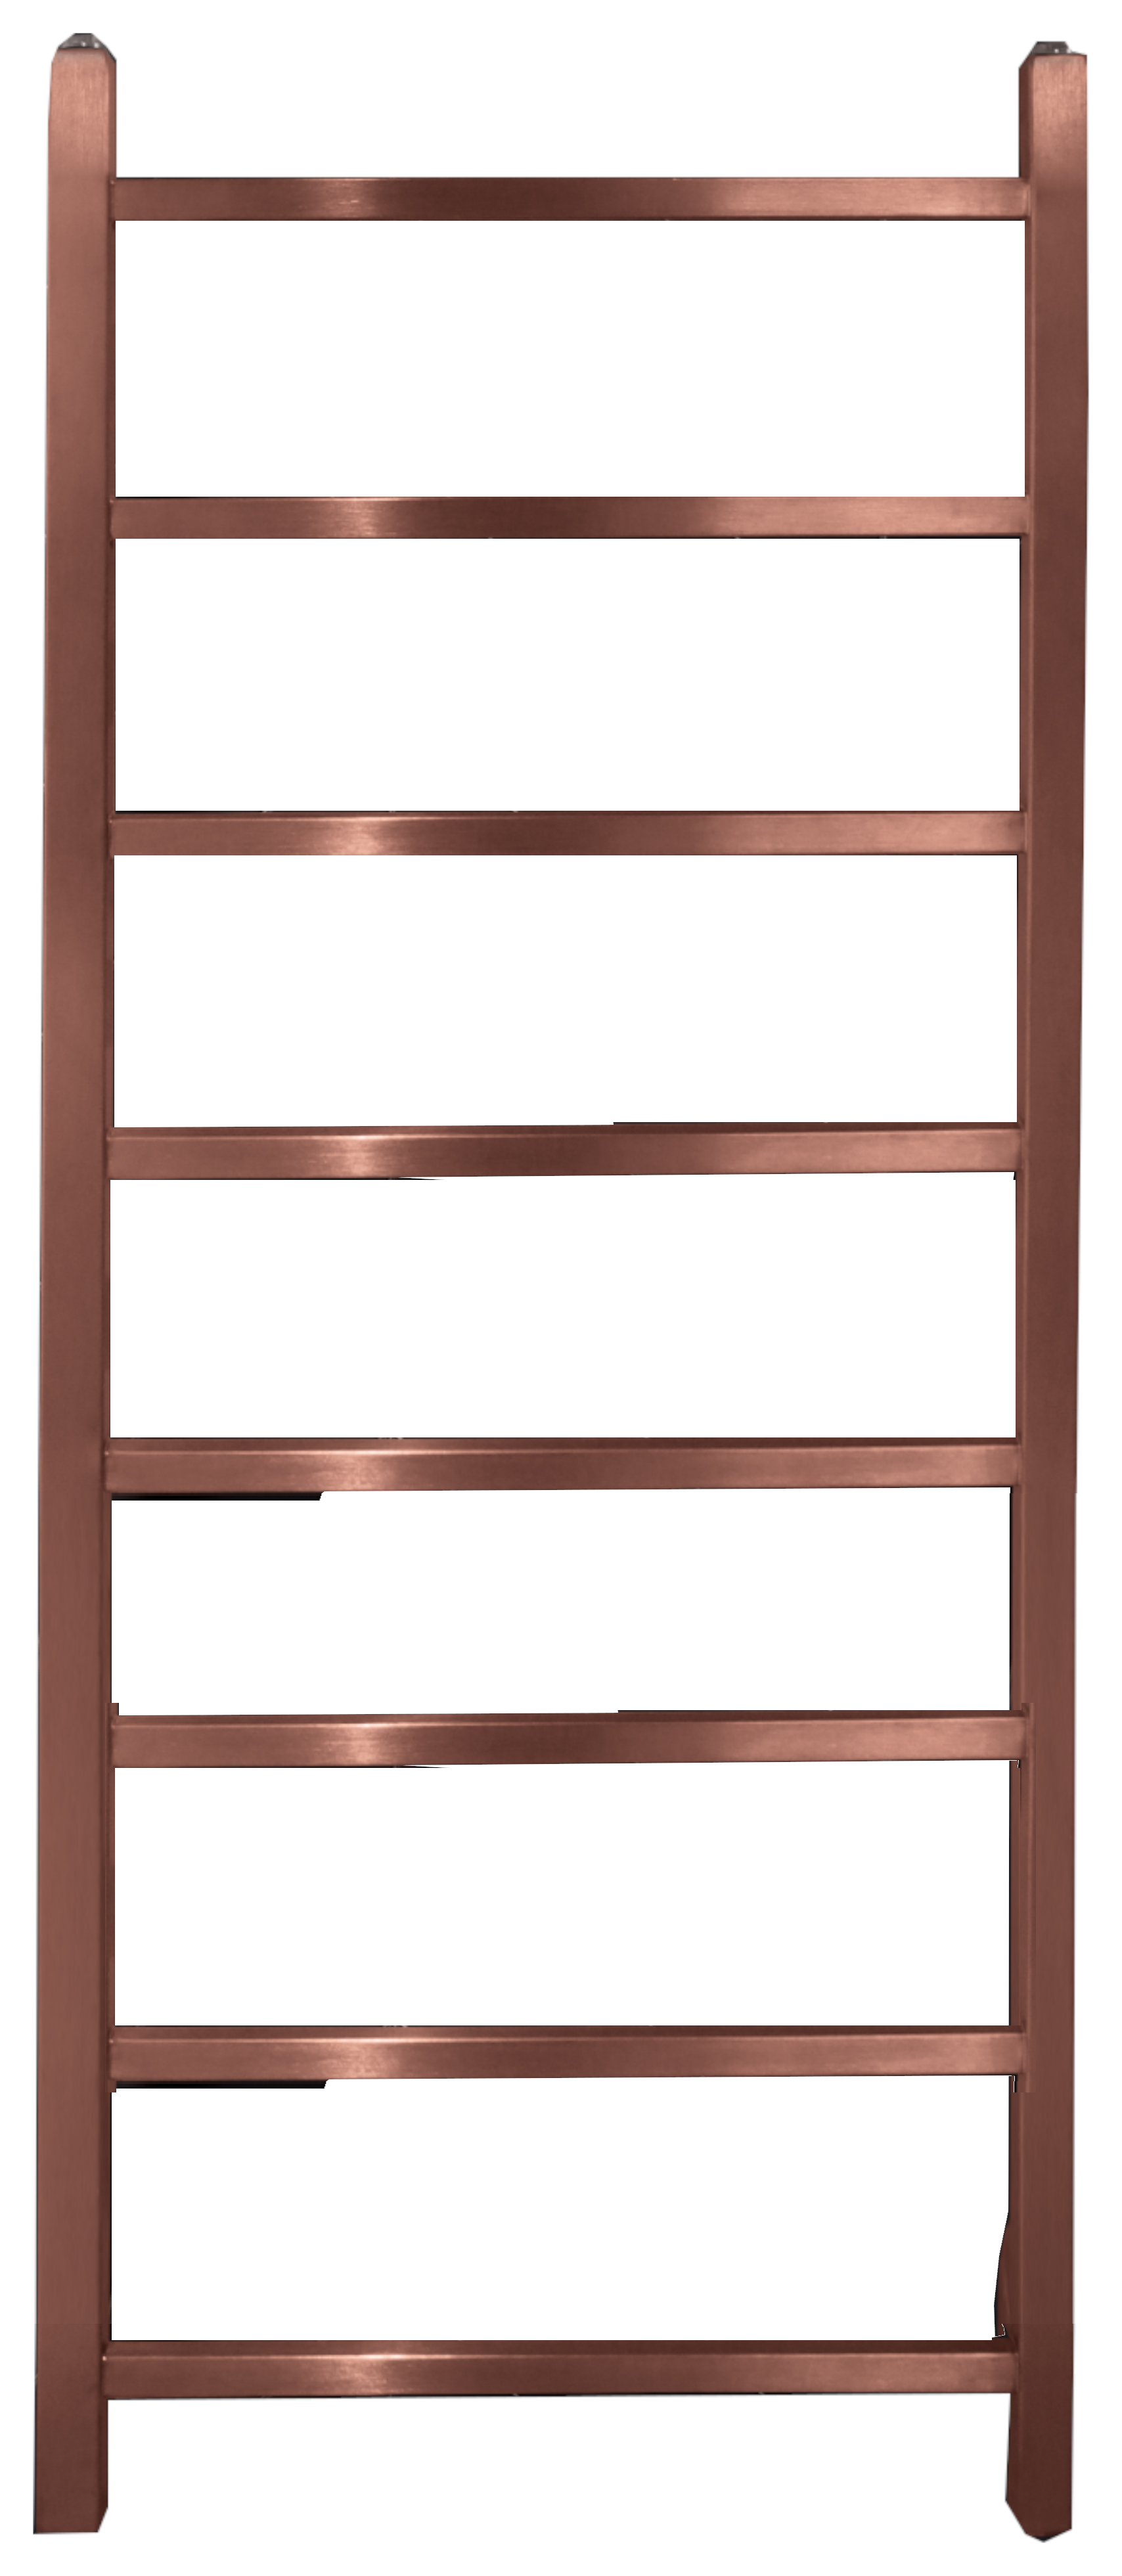 Towelrads Diva Rose Gold Dry Electric Non Thermostatic Towel Radiator - 1200 x 500mm